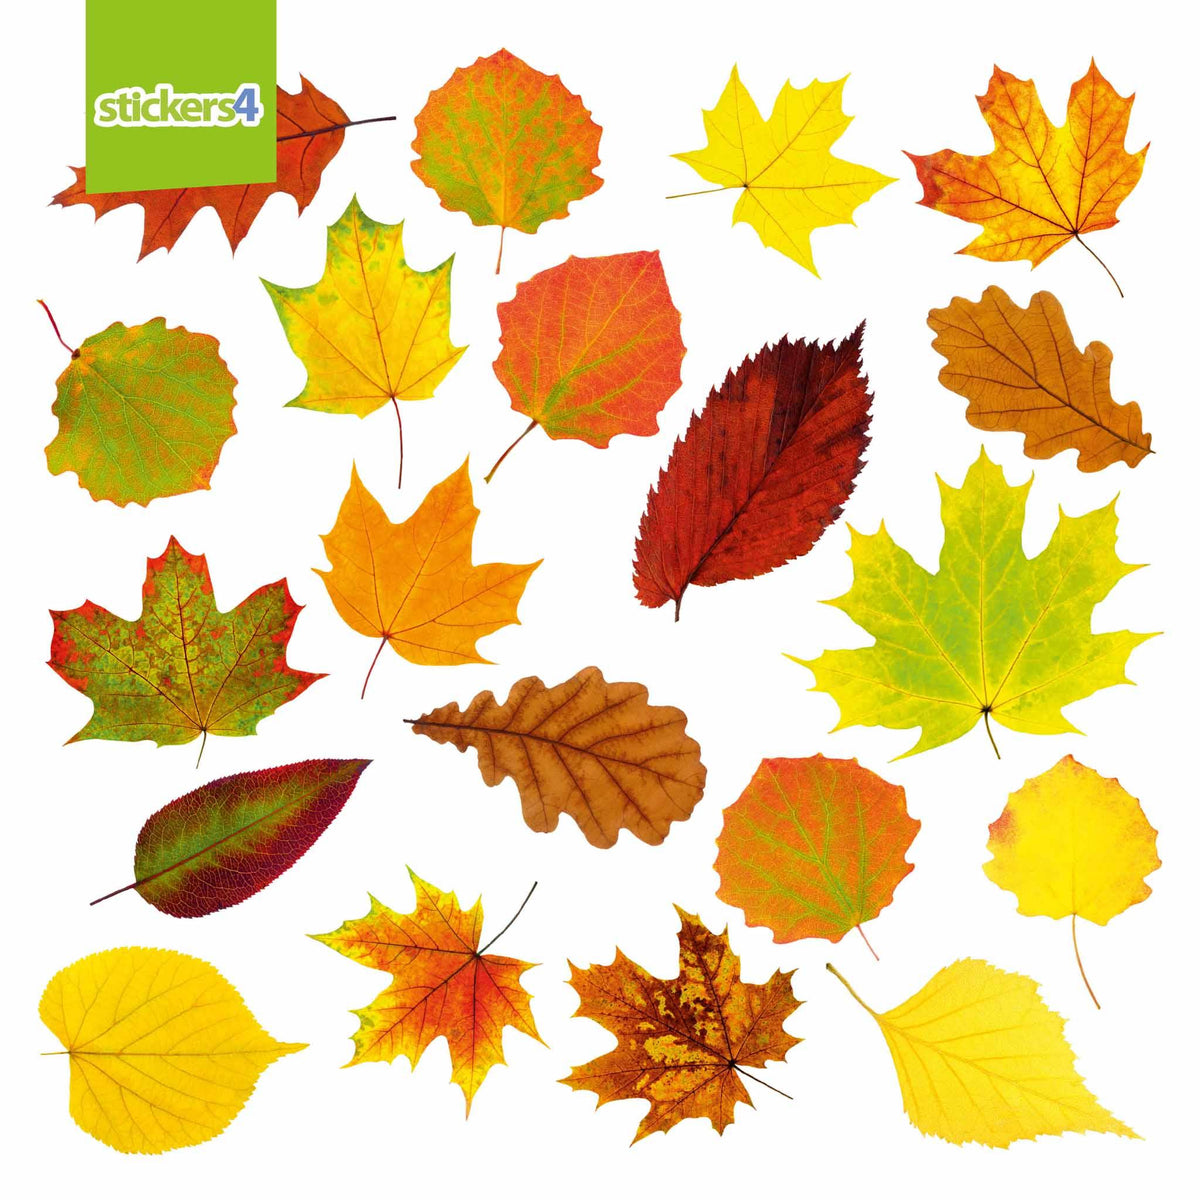 Photorealistic Autumn Leaves Shop Window Stickers - Pack 1 Autumn Window Display